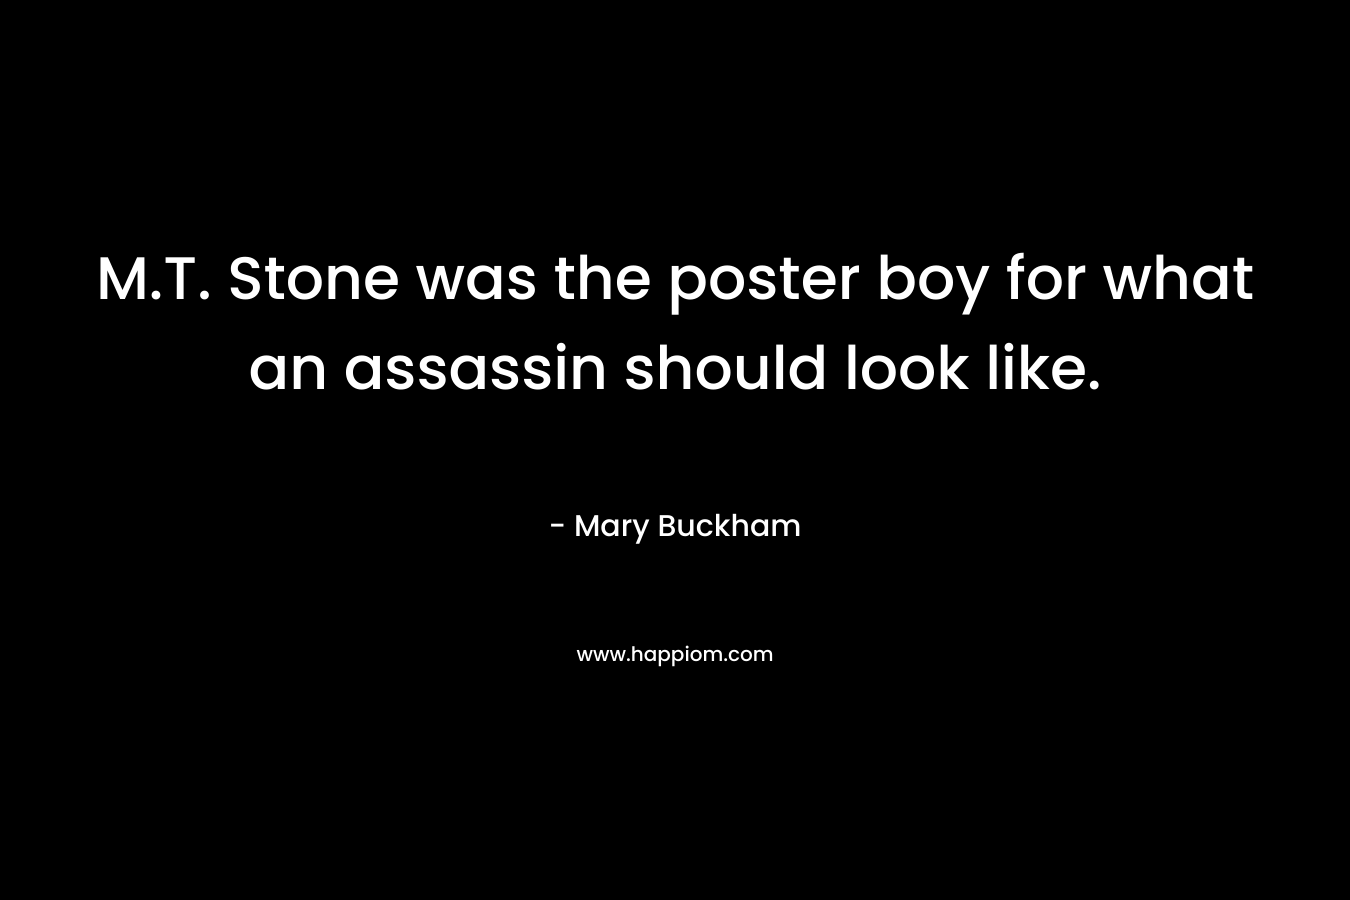 M.T. Stone was the poster boy for what an assassin should look like. – Mary Buckham